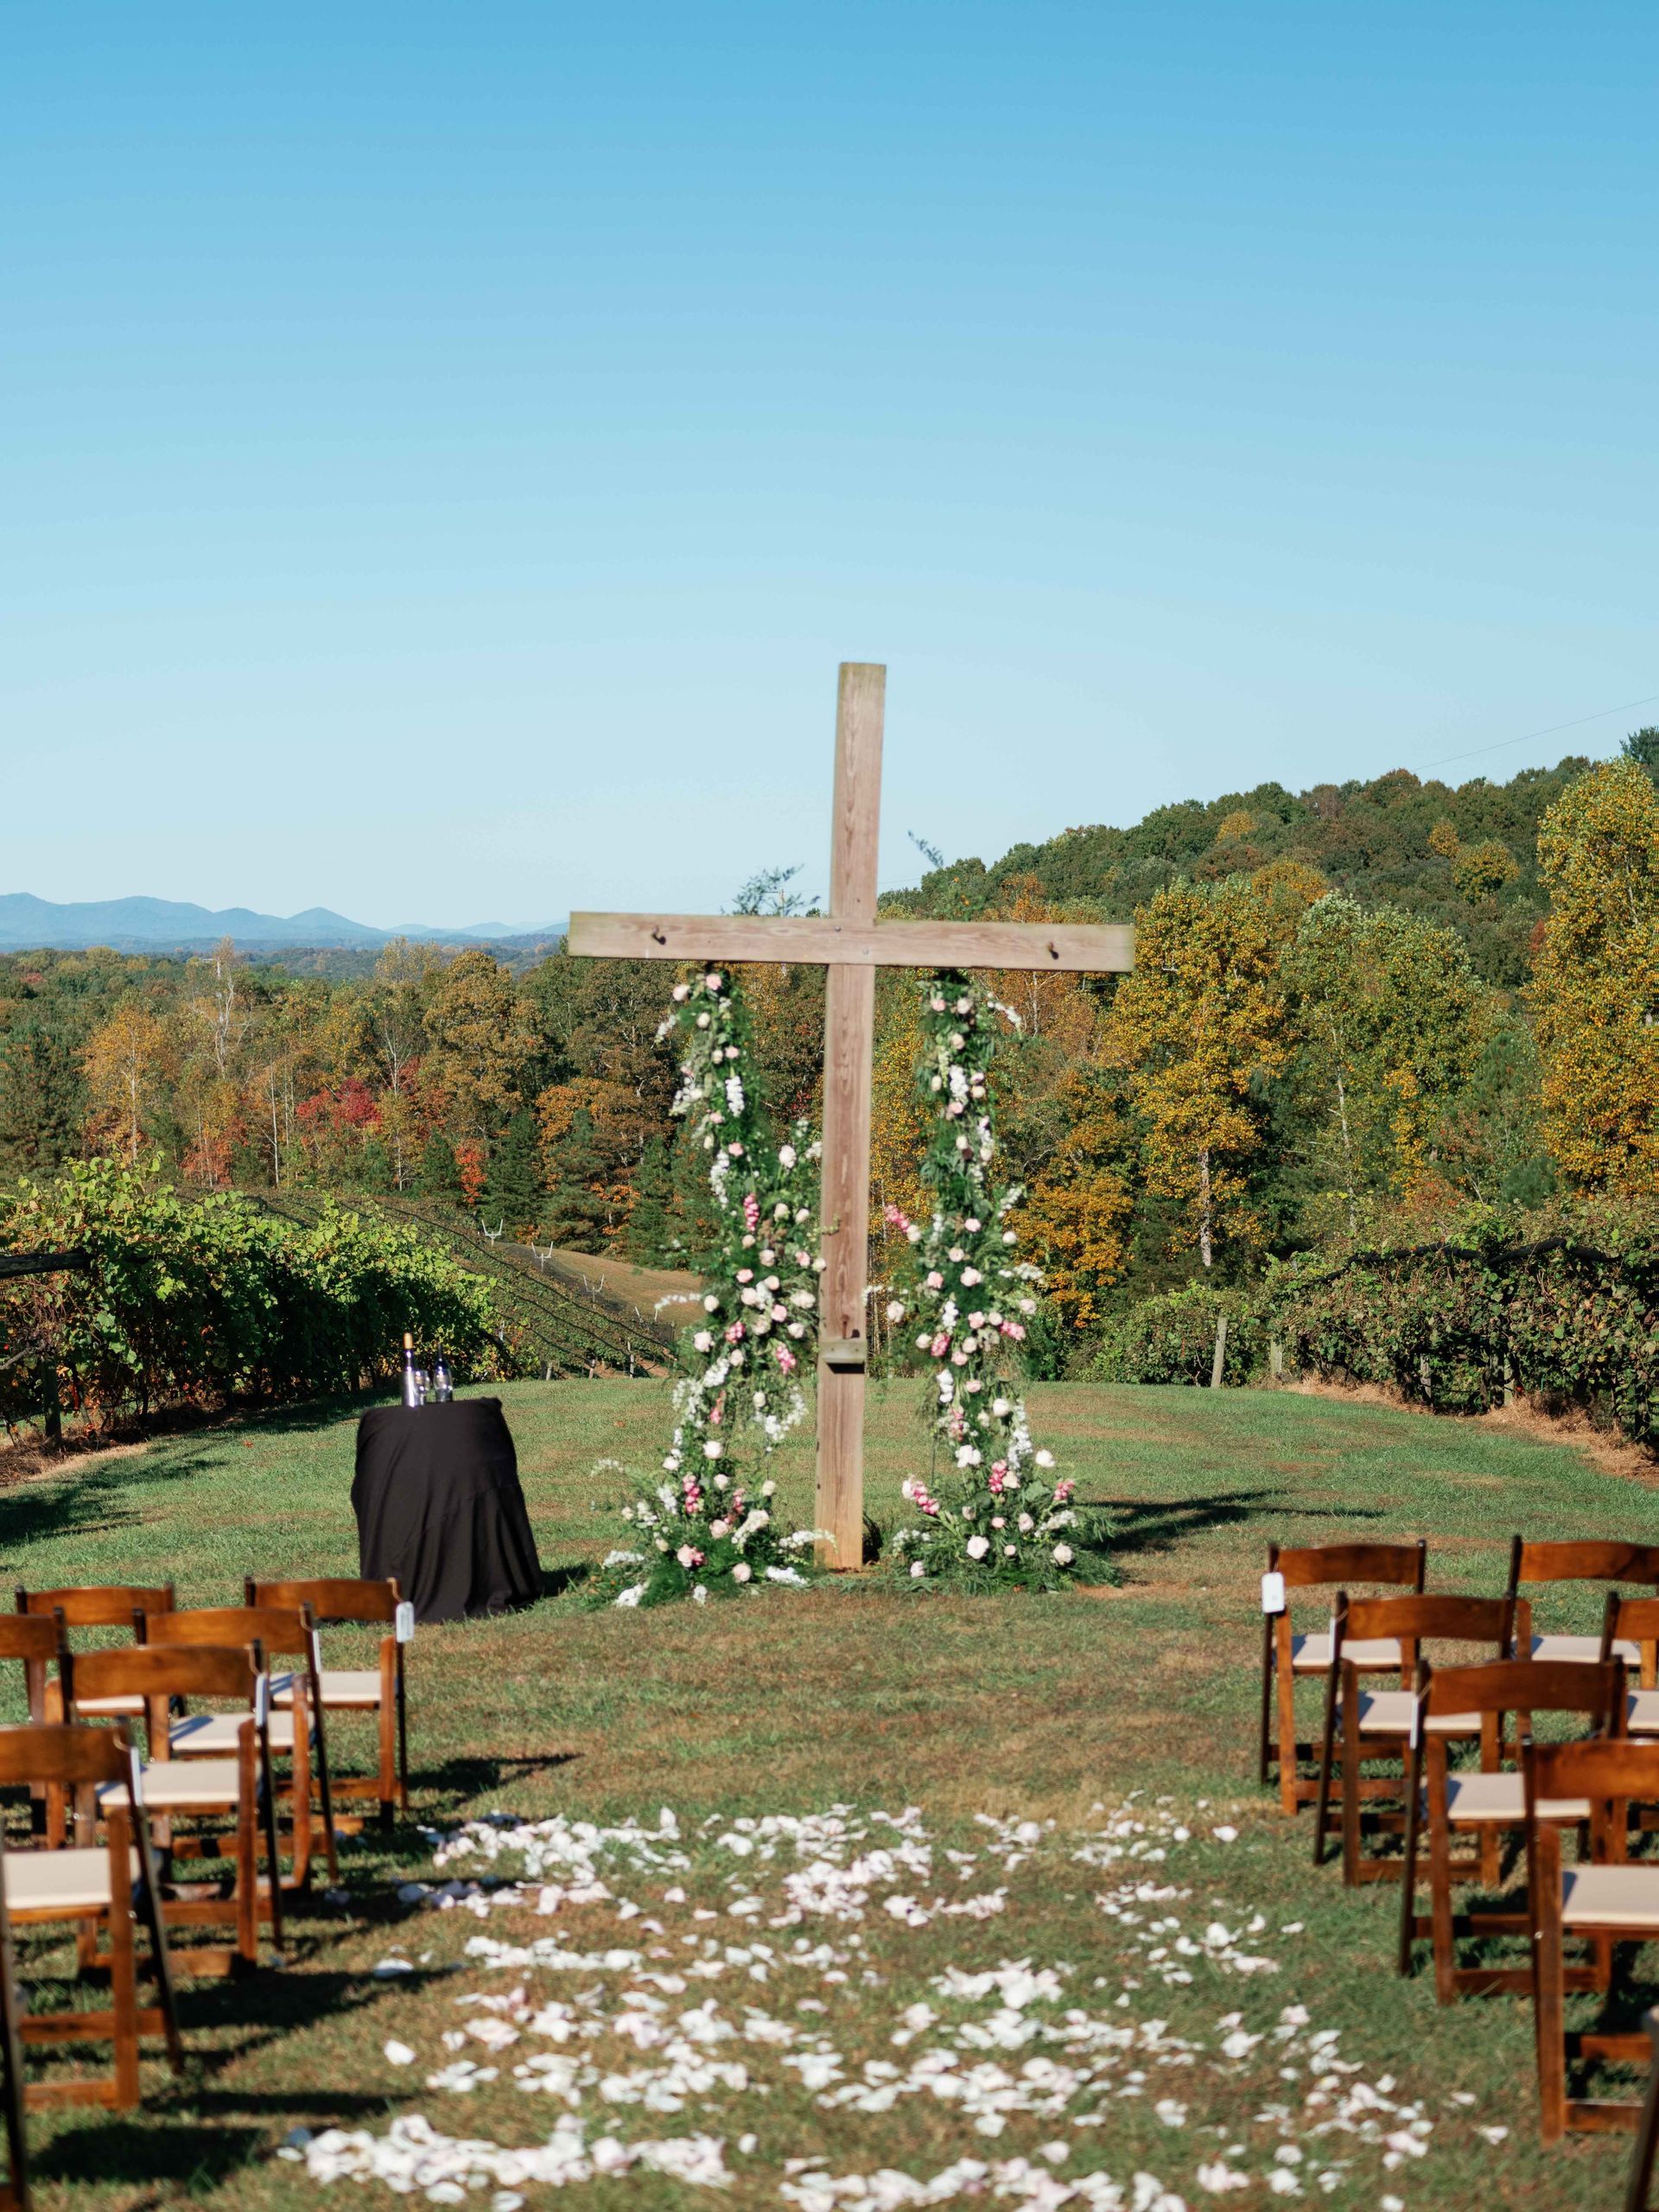 A wooden cross in the middle of a field with chairs in front of it